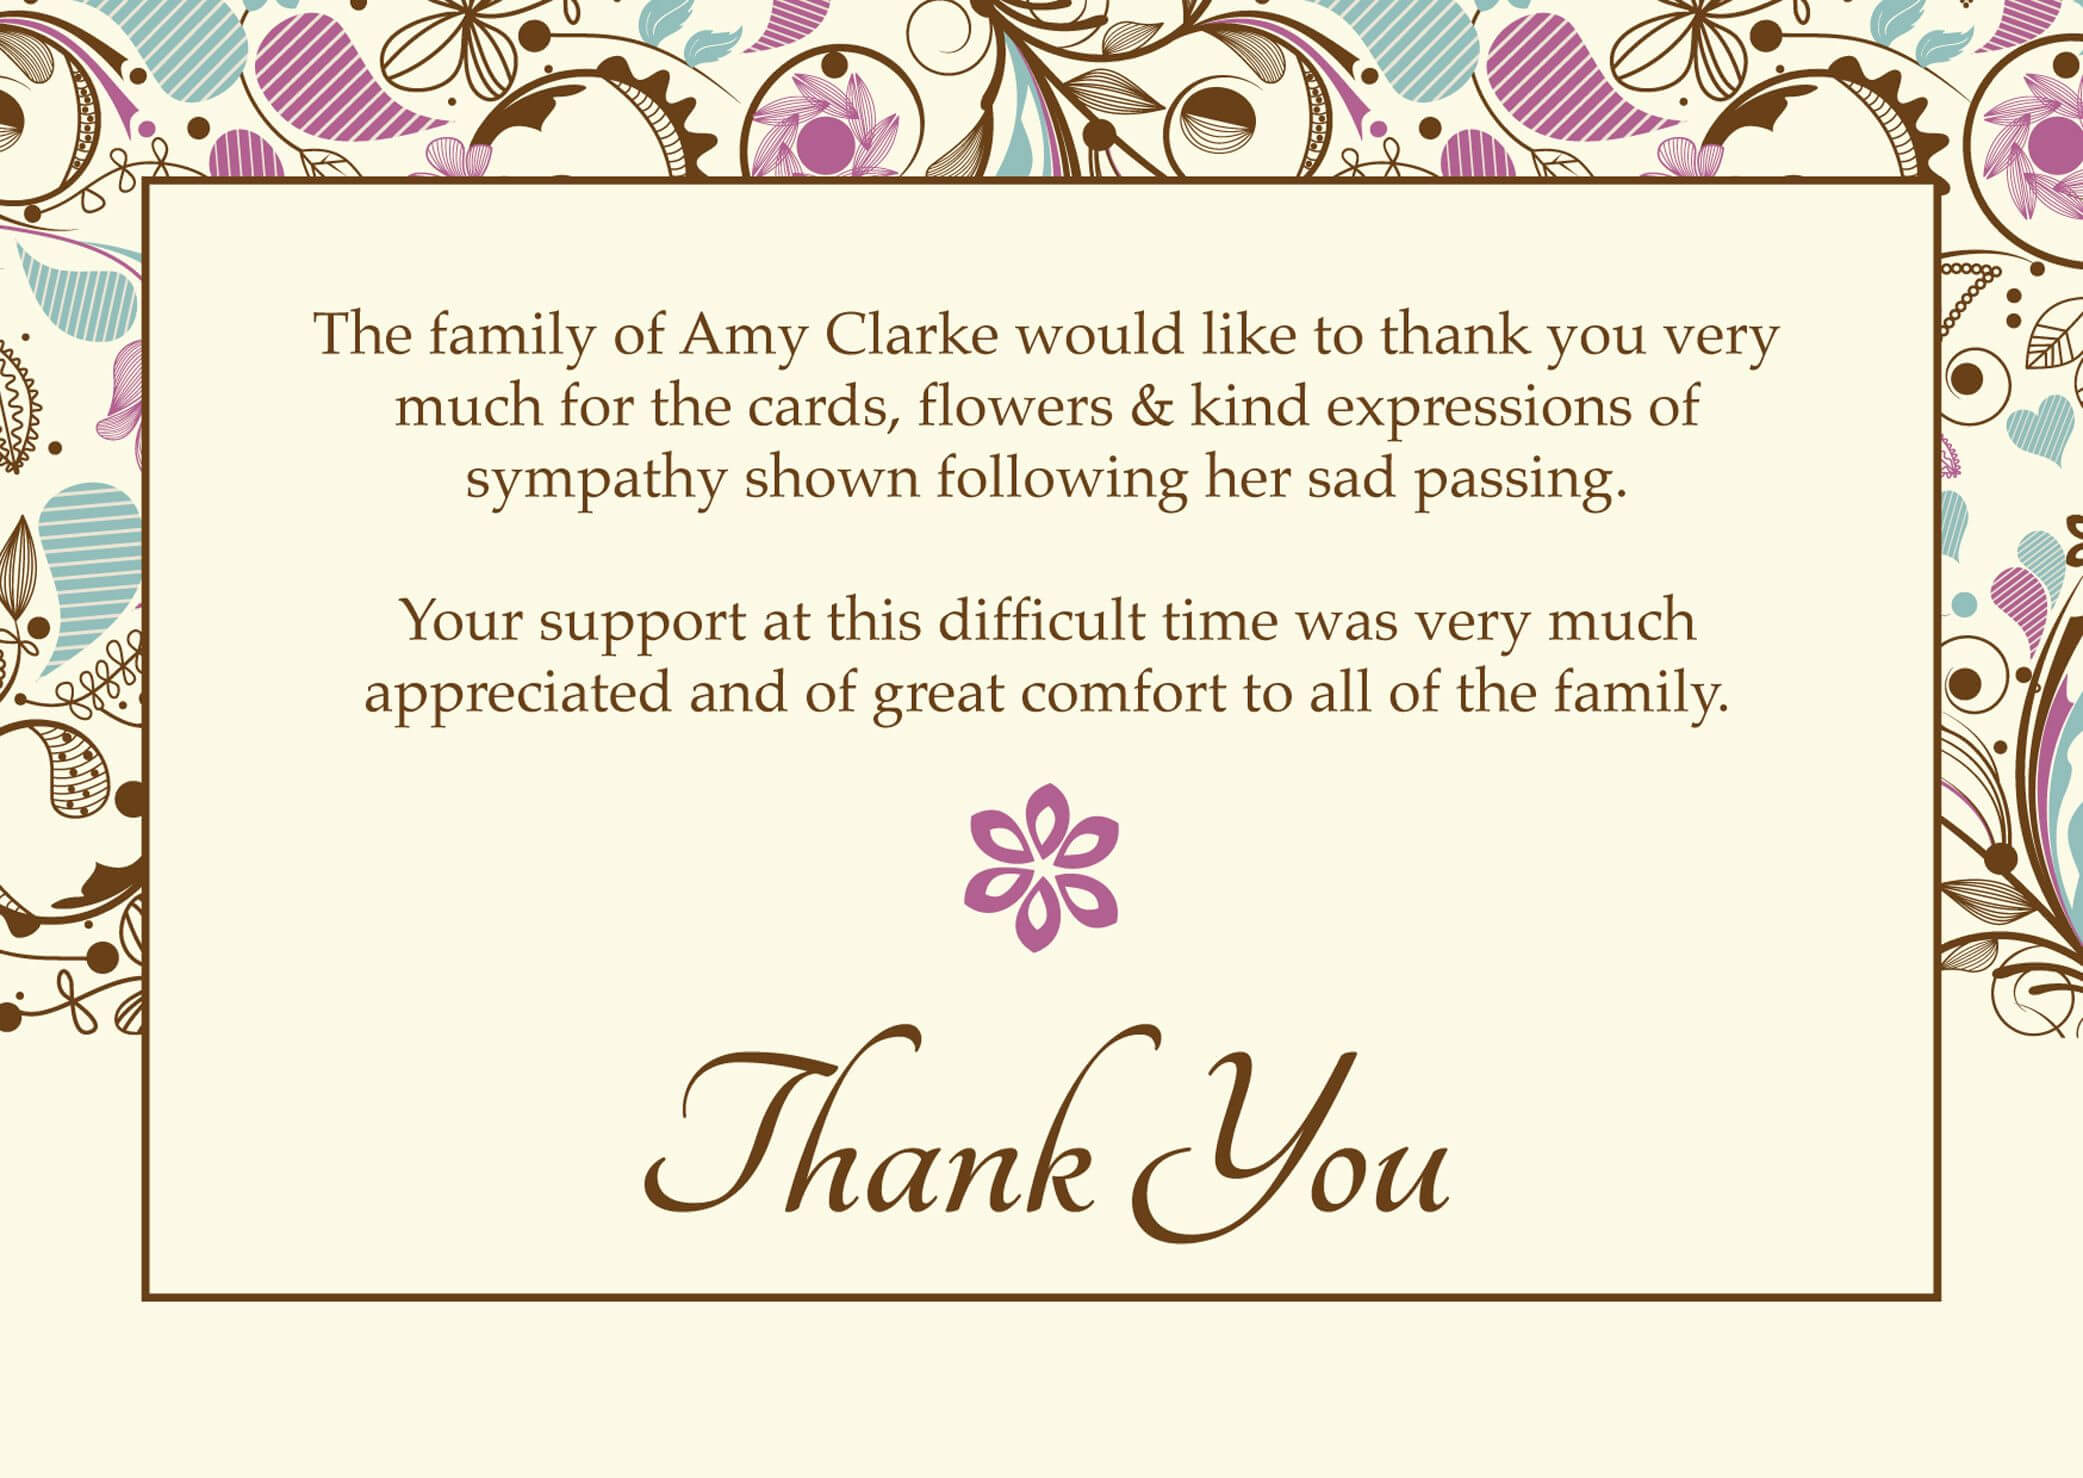 004 Thank You Card Template Awful Ideas Free Word Bridal Pertaining To Thank You Card Template Word